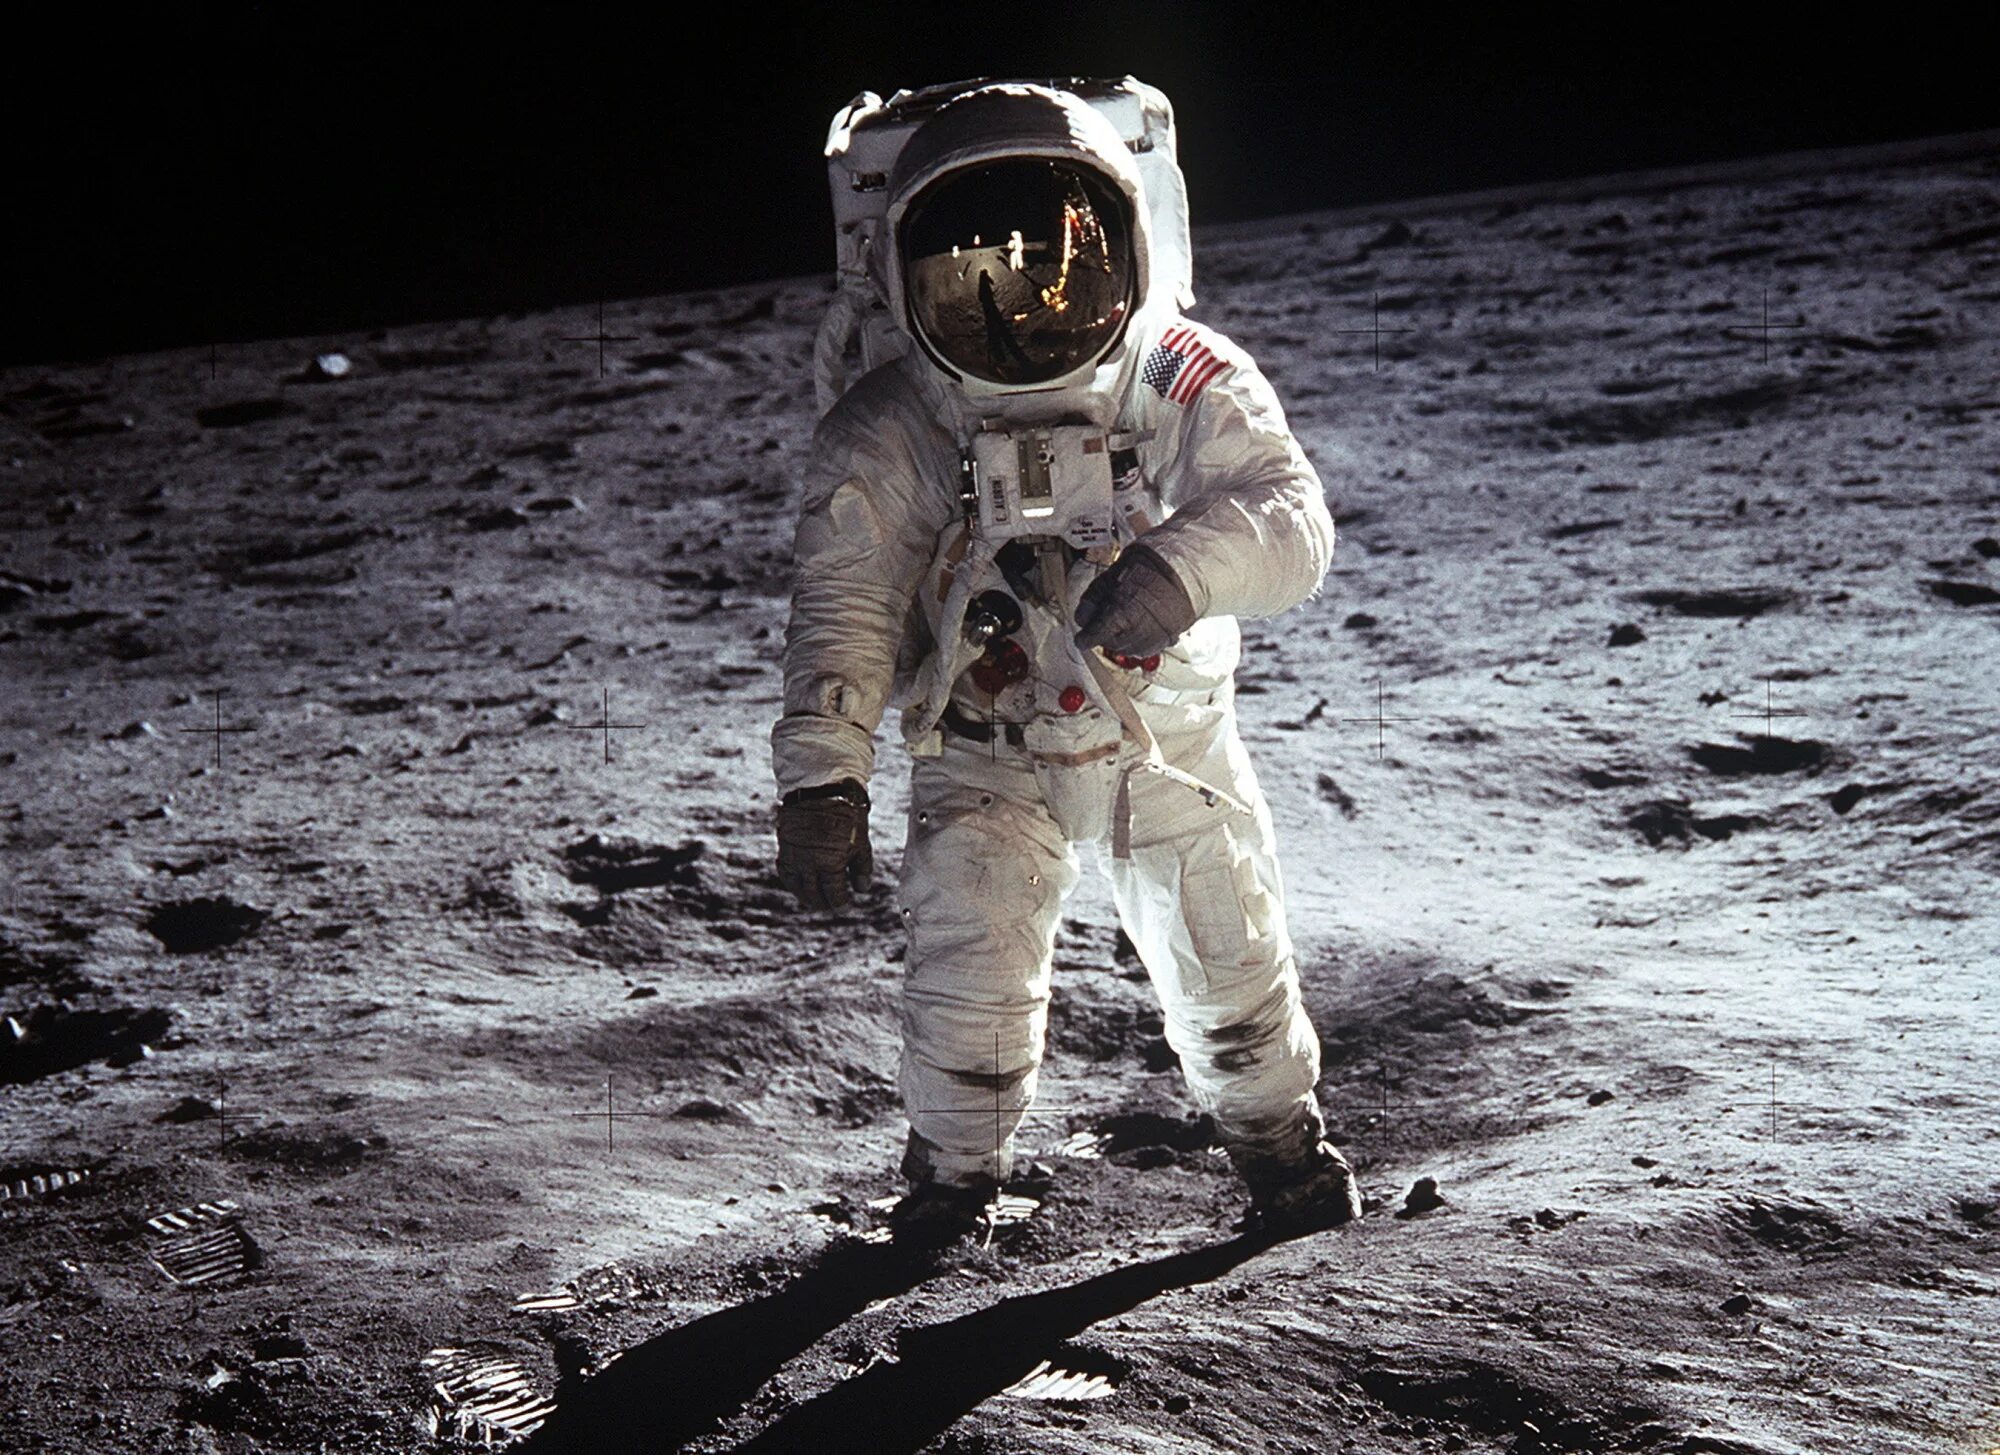 Man lands on the moon. Аполлон 11.